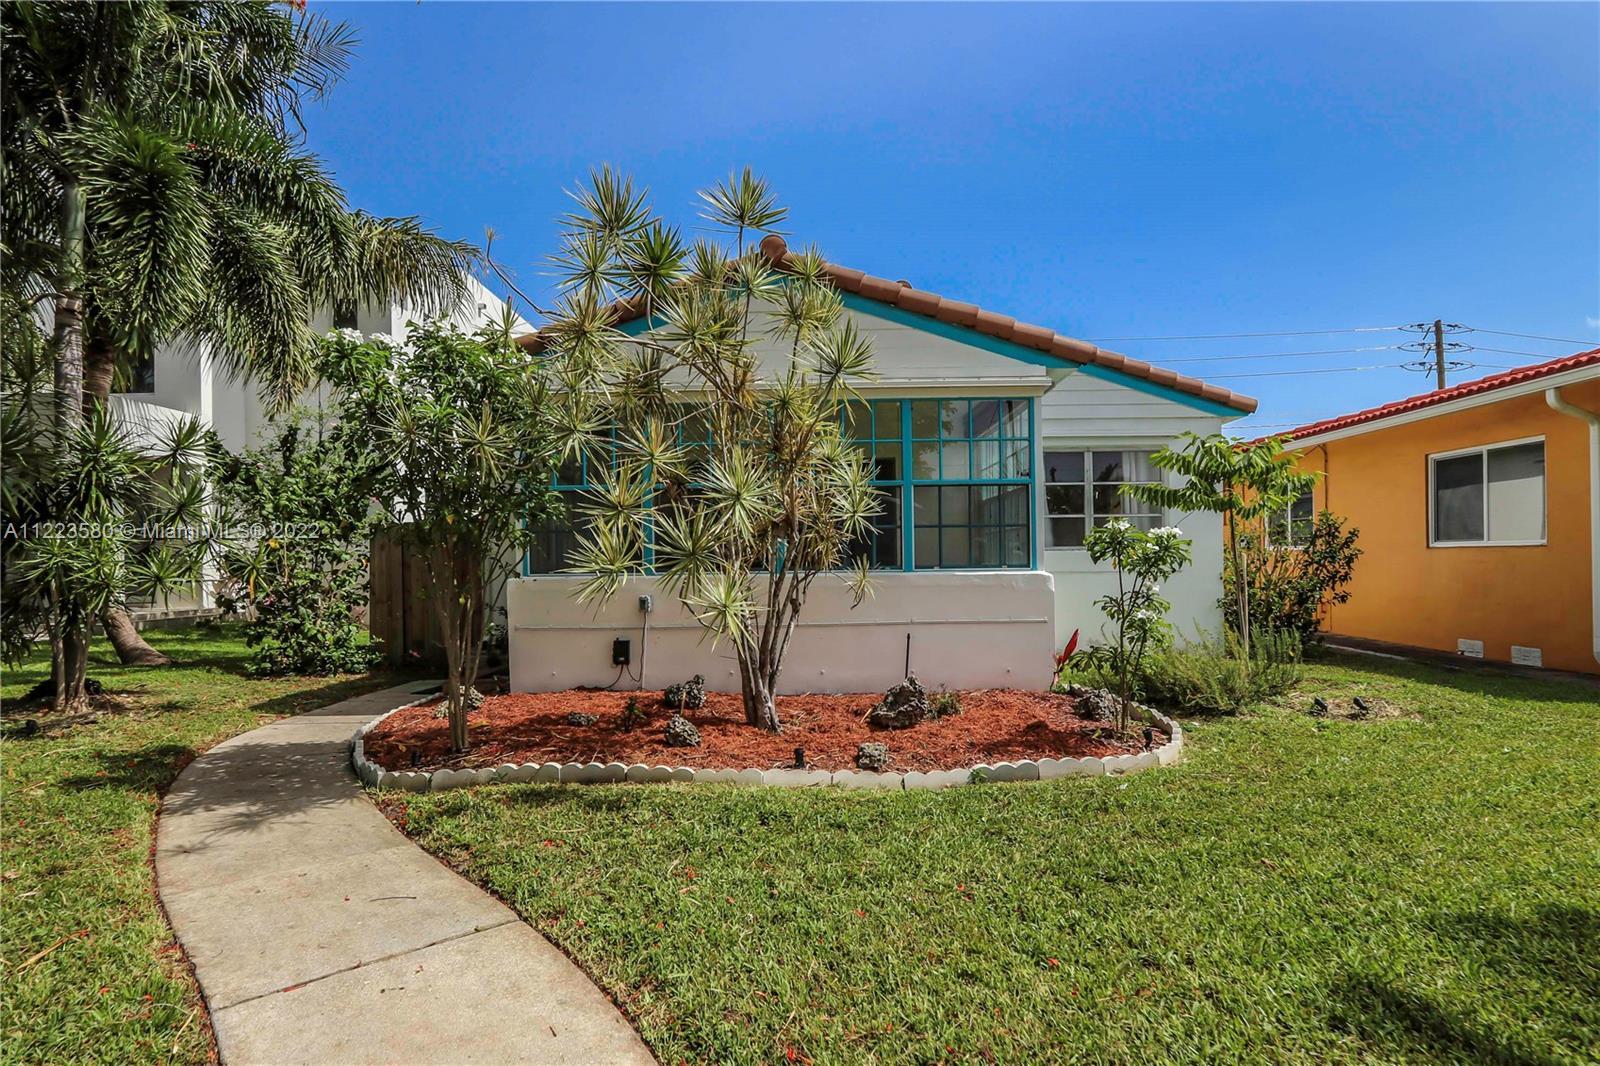 Adorable property in Beautiful East Hollywood ~ Spacious 2 Bedroom/2 Bath home with Florida room ~ O